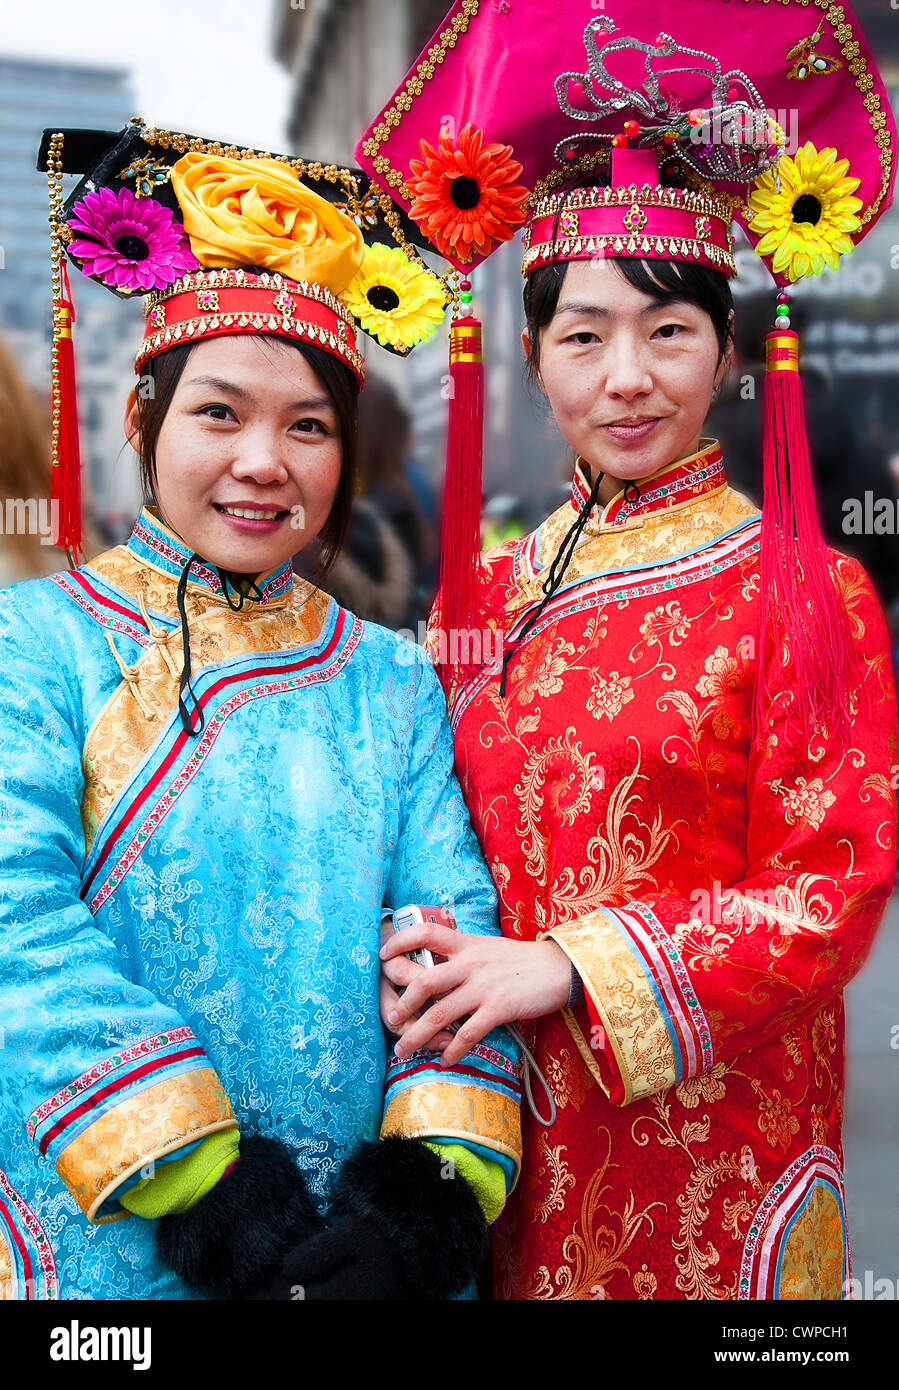 UK. England. London. Two Chinese women in traditional costume during Chinese New Year celebrations. Stock Photo